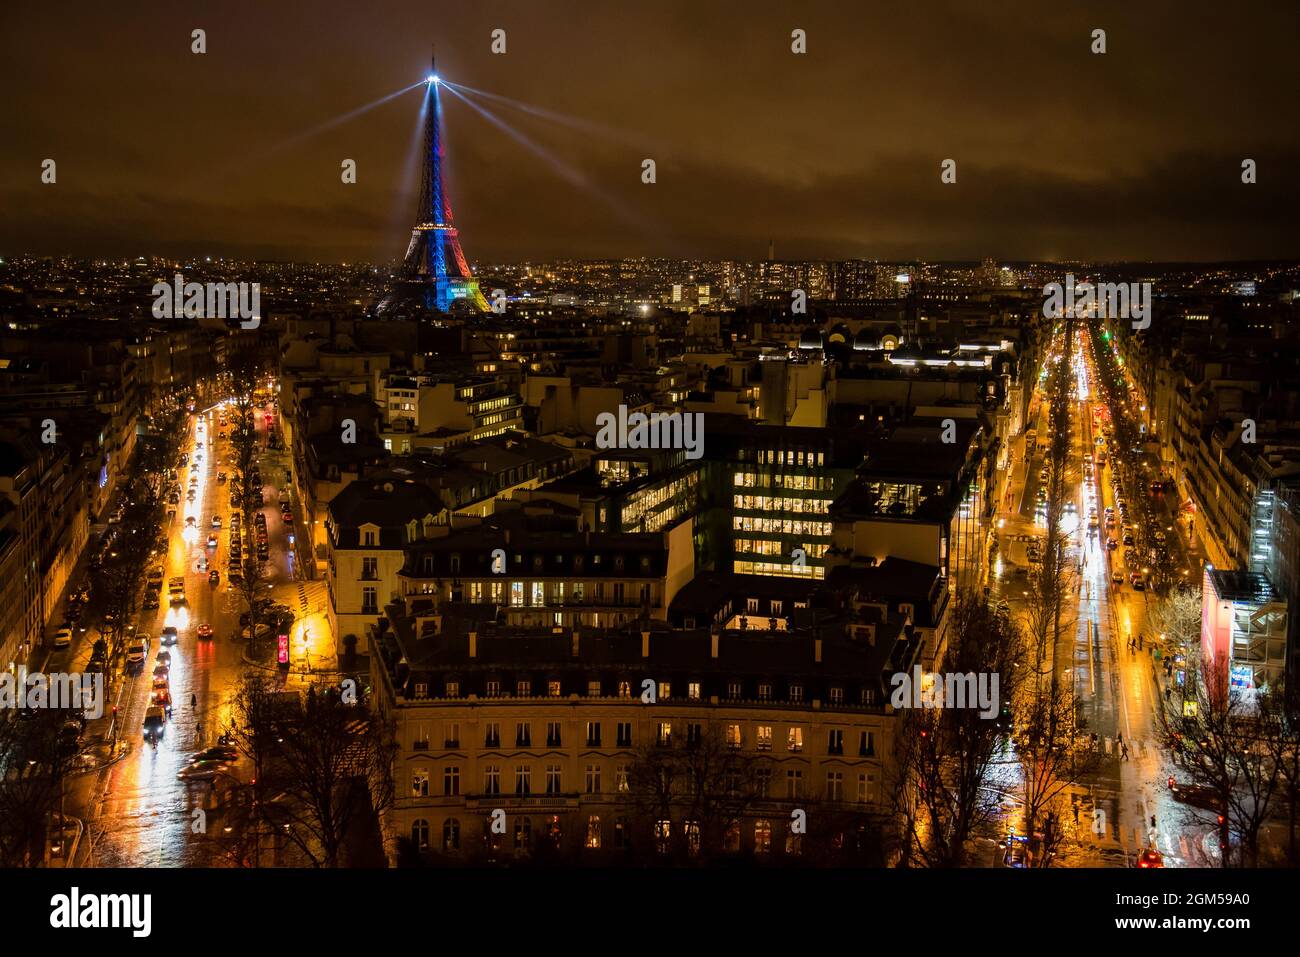 Lovely Paris Nighttime Panoramic Scenery with rainbow Eiffel Tower and Other Popular Places glowing gold Stock Photo